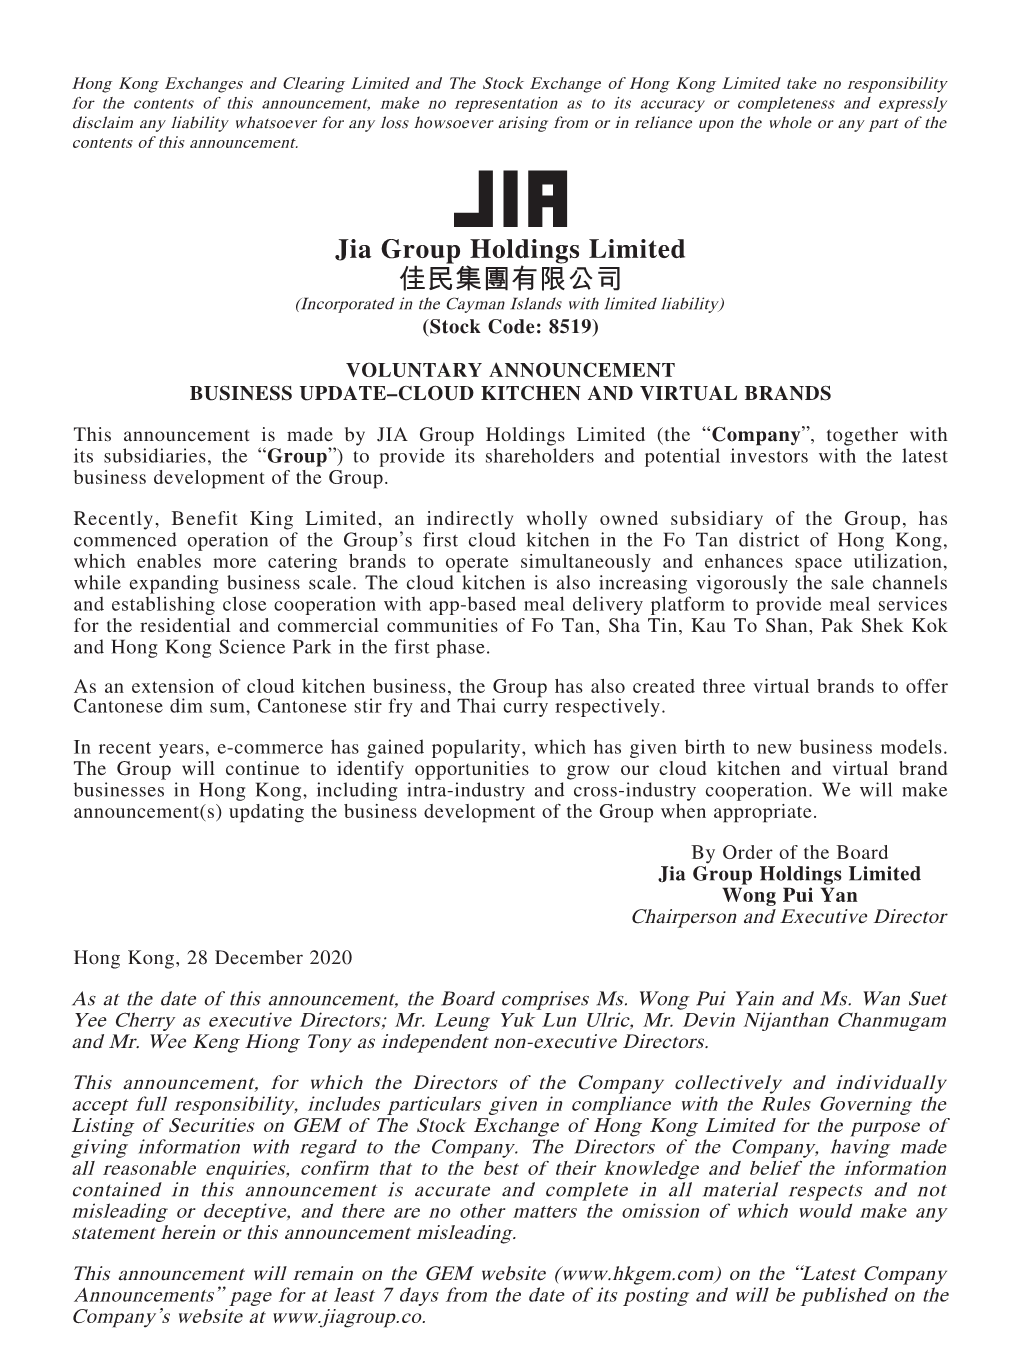 Jia Group Holdings Limited 佳民集團有限公司 (Incorporated in the Cayman Islands with Limited Liability) (Stock Code: 8519)